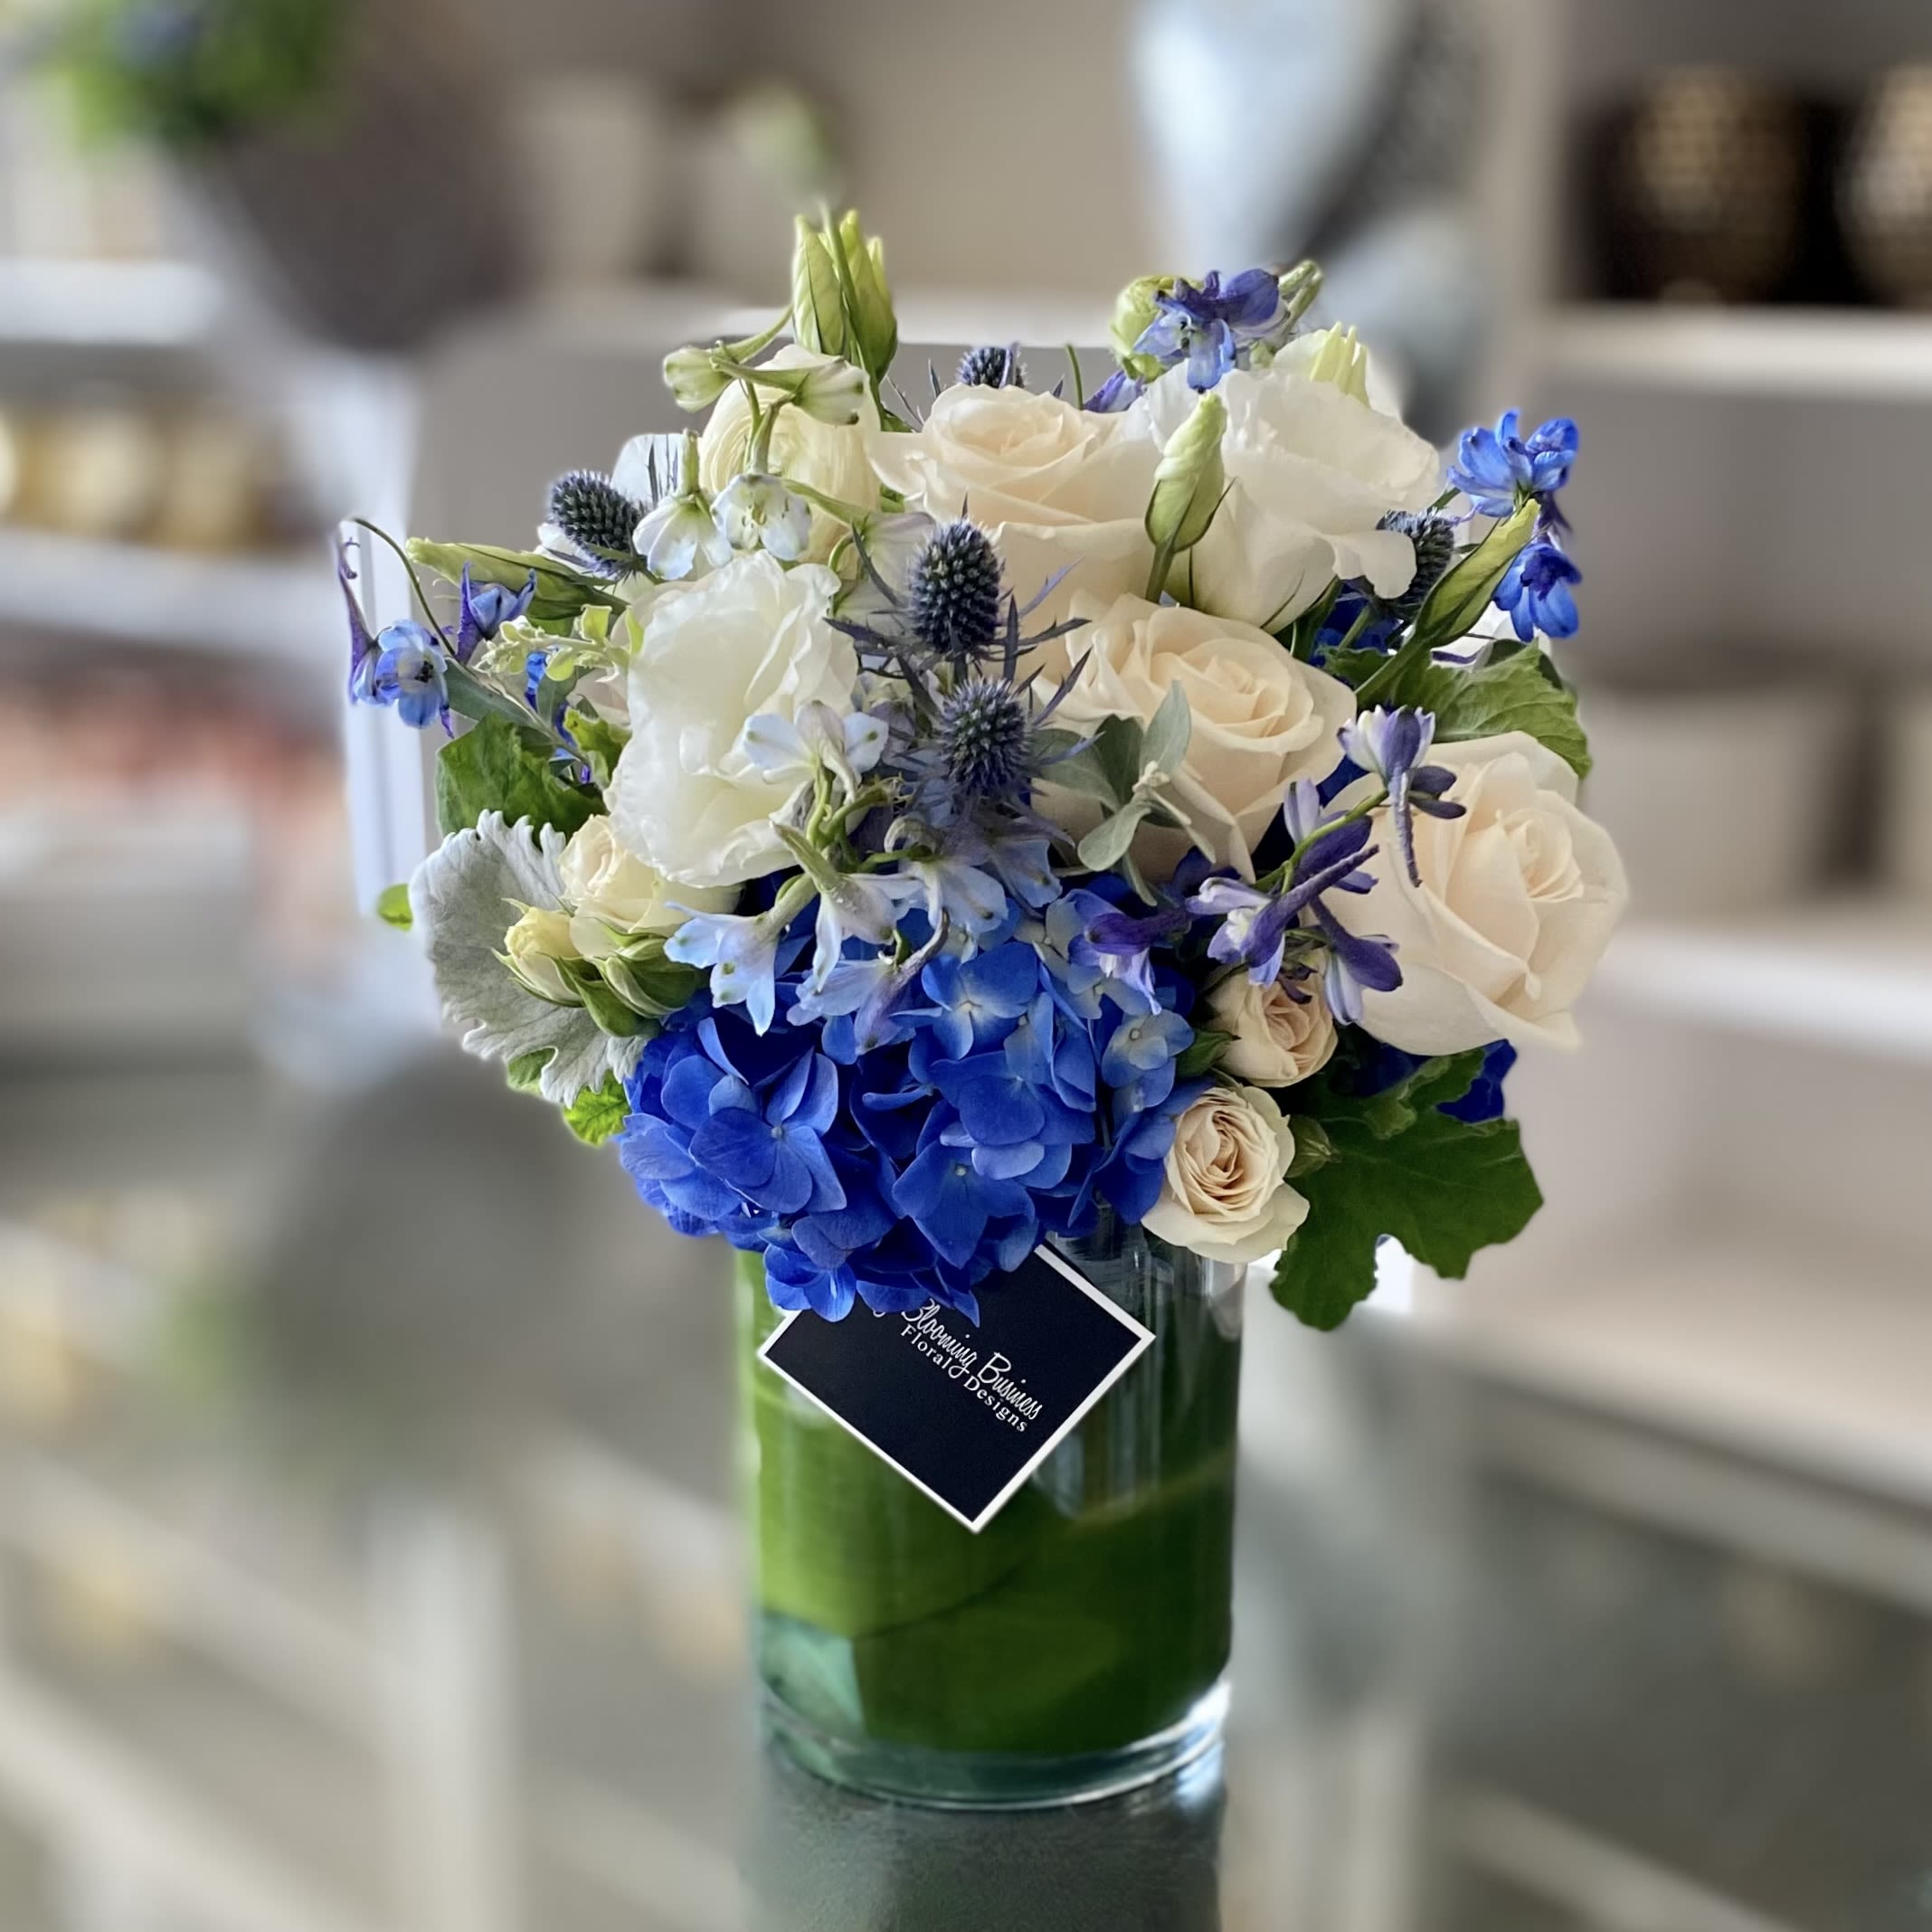 True Blue  - If you are looking for a beautiful and unique floral arrangement, then you need to check out True Blue! With the beautiful combination of blue hydrangeas, cream roses, spray roses, and blue thistle, this elegant piece will look great in any home. The bouquet is set in a cylinder vase and lined with t leaf lining to make it more personalized and unique. Whether you order it for yourself or as a gift for a special someone, this stunning bouquet is sure to add a fresh and cheery vibe. The soft blue and white colors will make any room look brighter and more luxurious. This piece is perfect for any occasion and will never fail to leave a lasting impression. Get your one of a kind True Blue now!